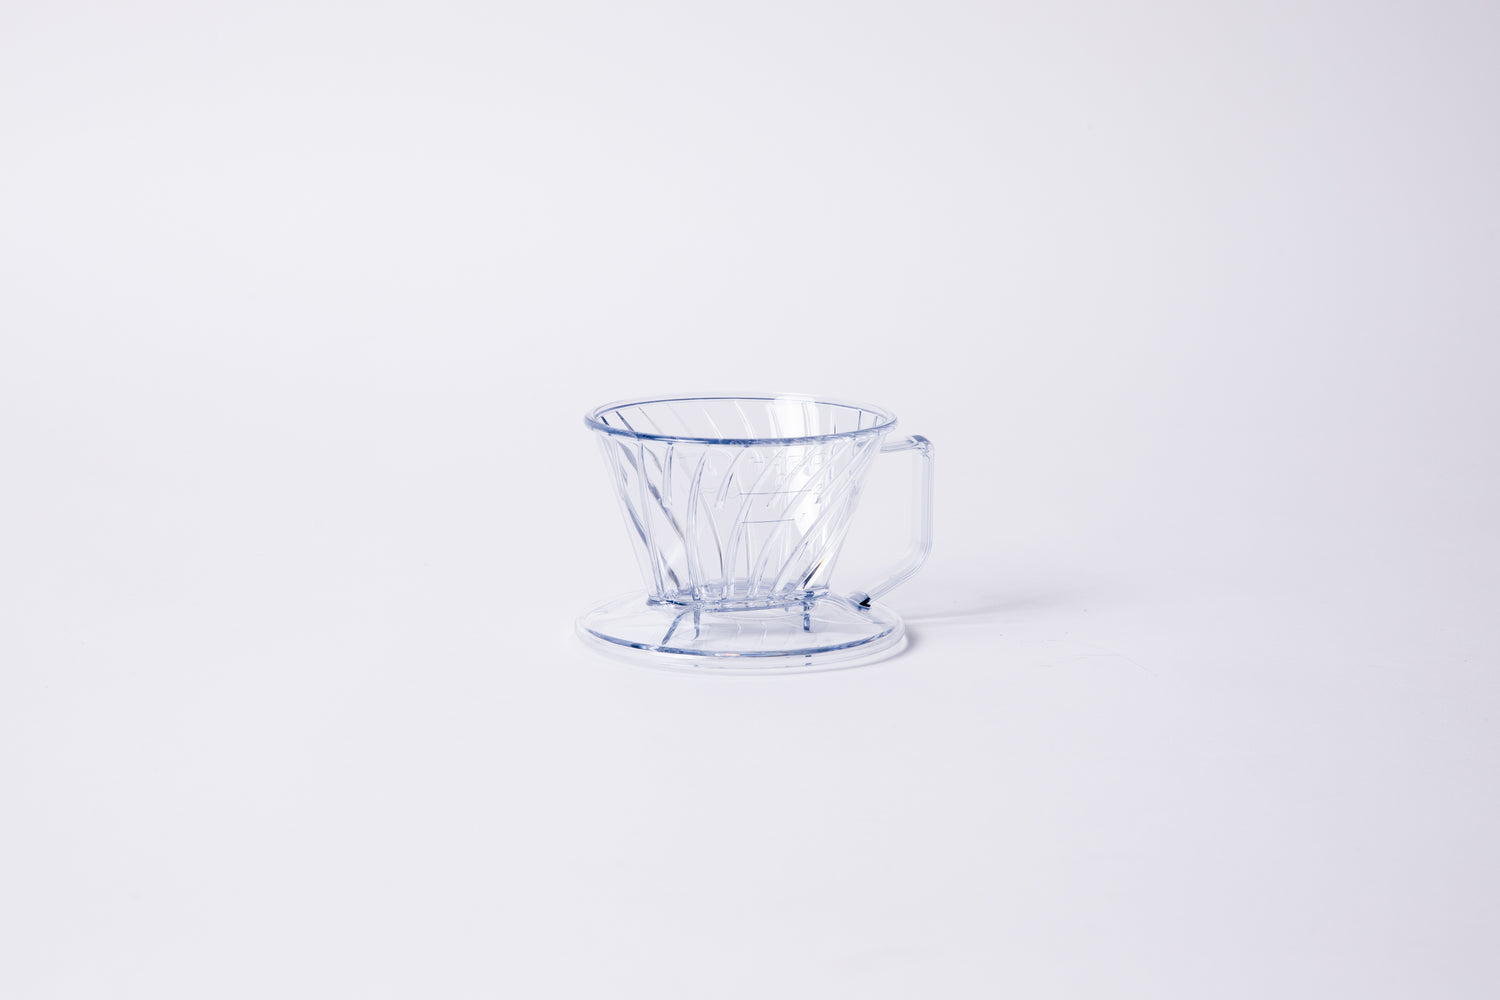 Clear plastic ribbed cone shaped dripper with a flat bottom base and handle. Set on a light gray background